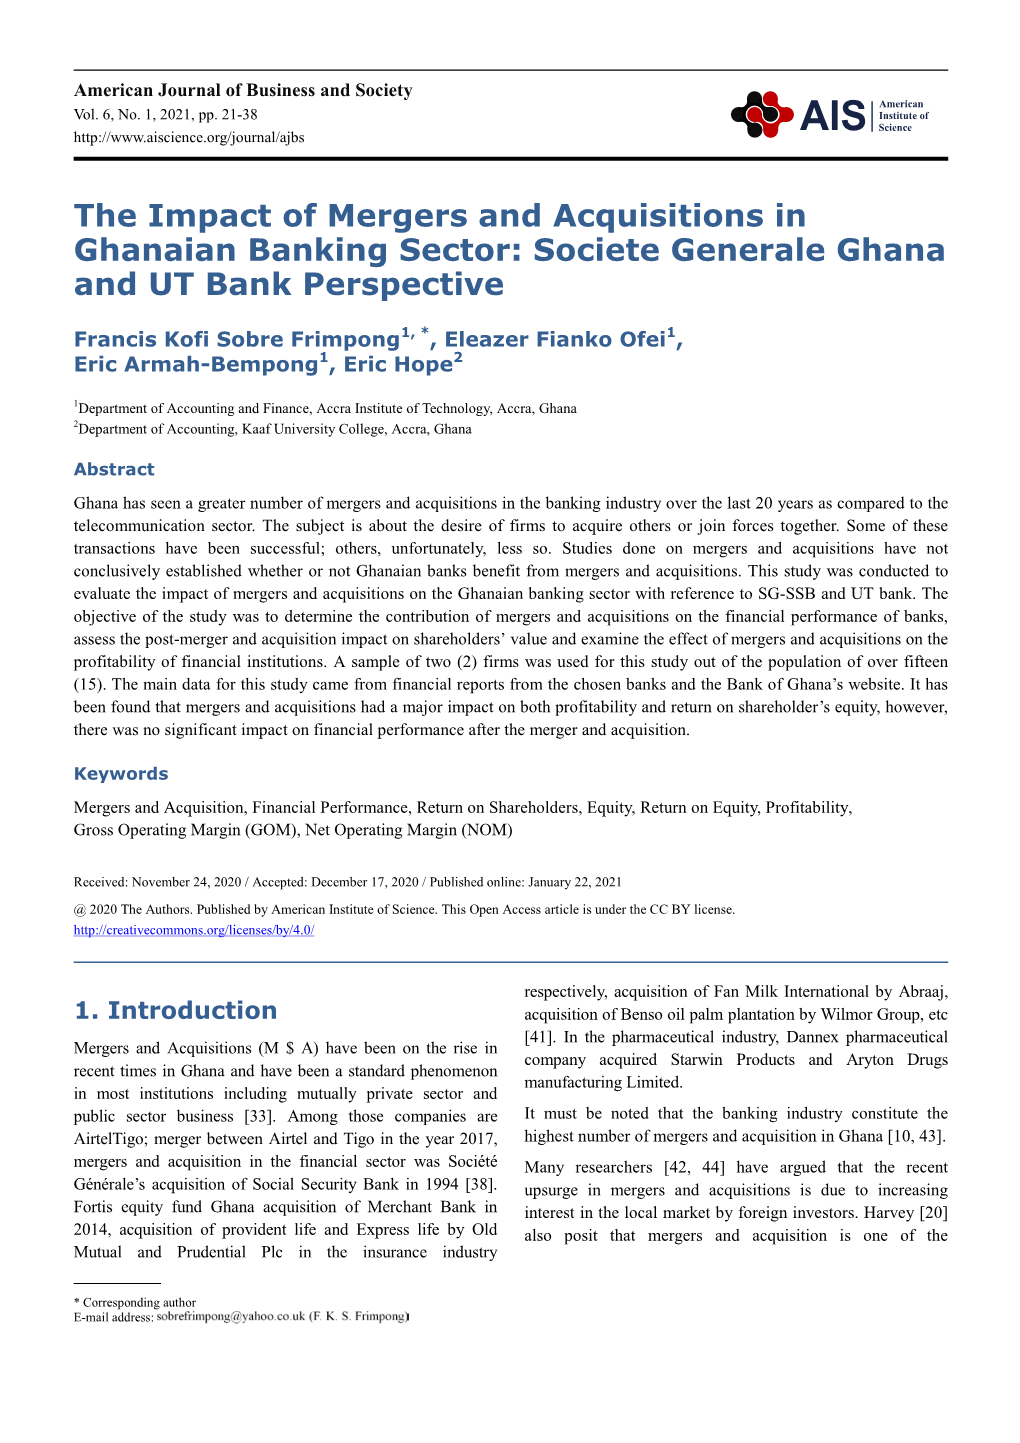 The Impact of Mergers and Acquisitions in Ghanaian Banking Sector: Societe Generale Ghana and UT Bank Perspective